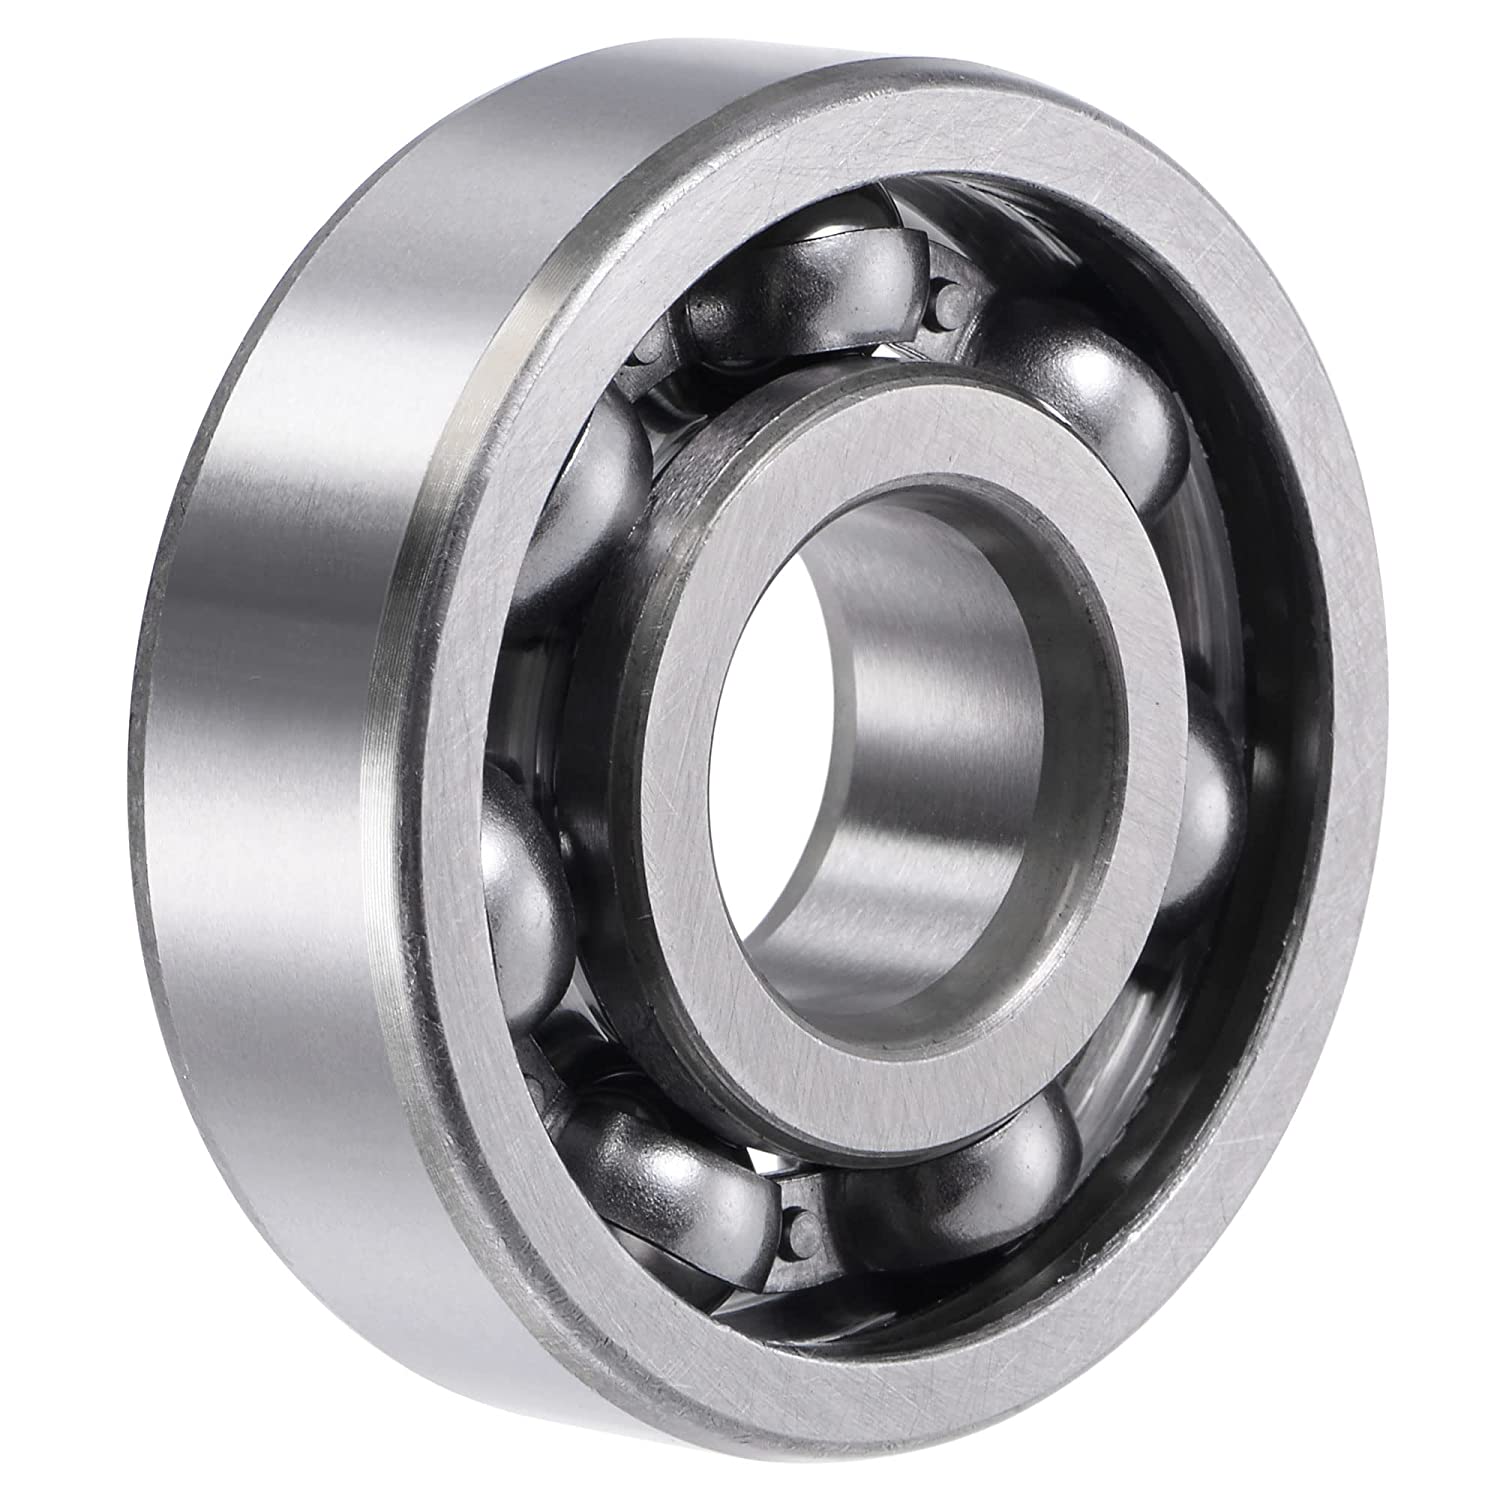 6303 Open Deep Groove Ball Bearing 17x47x14mm Double Sealed ABEC-3 Bearings 6303 zz 17*47*14mm